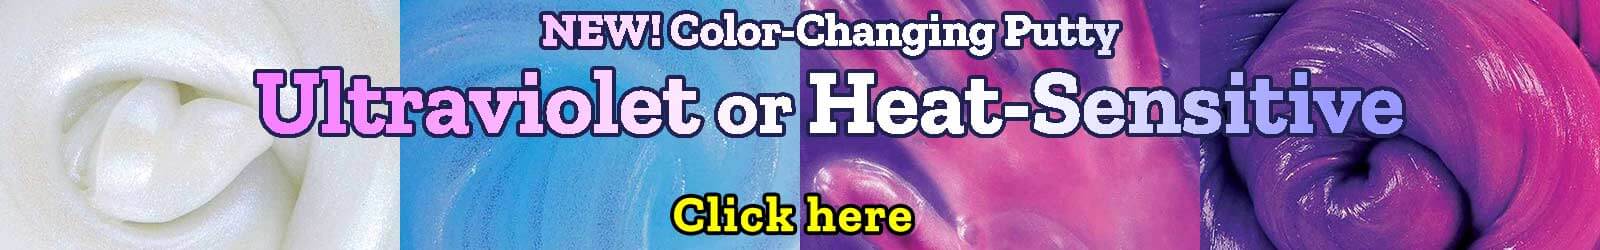 NEW! Color-Changing Putty Ultraviolet or Heat-Sensitive